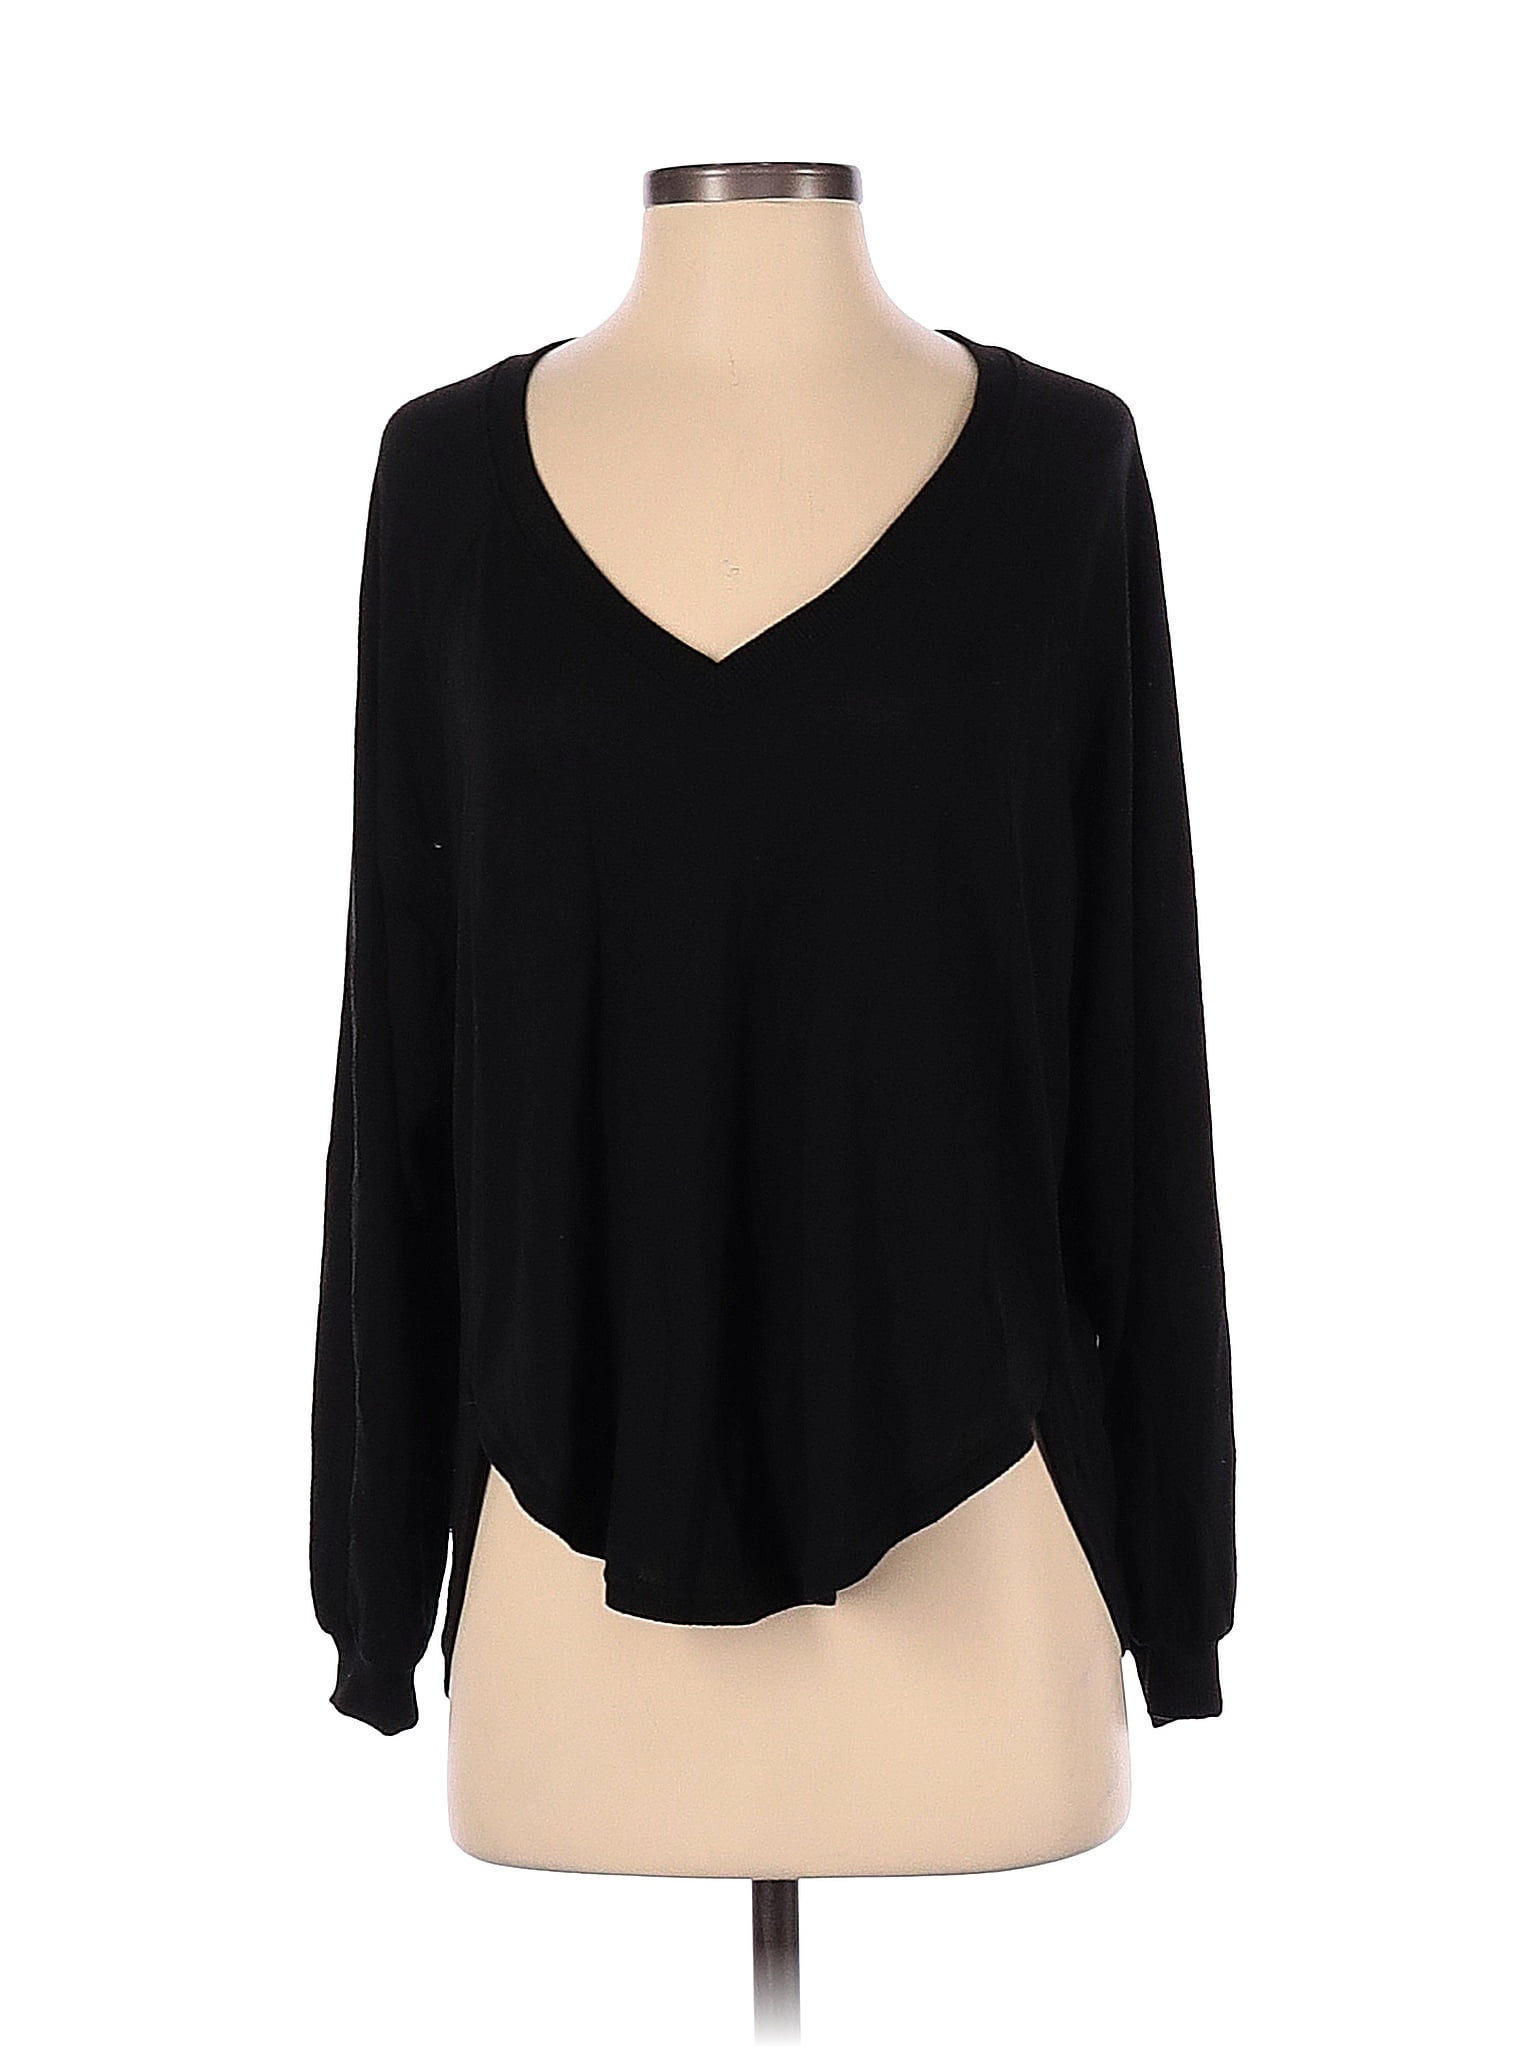 Z Supply Black Long Sleeve Top Size S - 68% off | thredUP